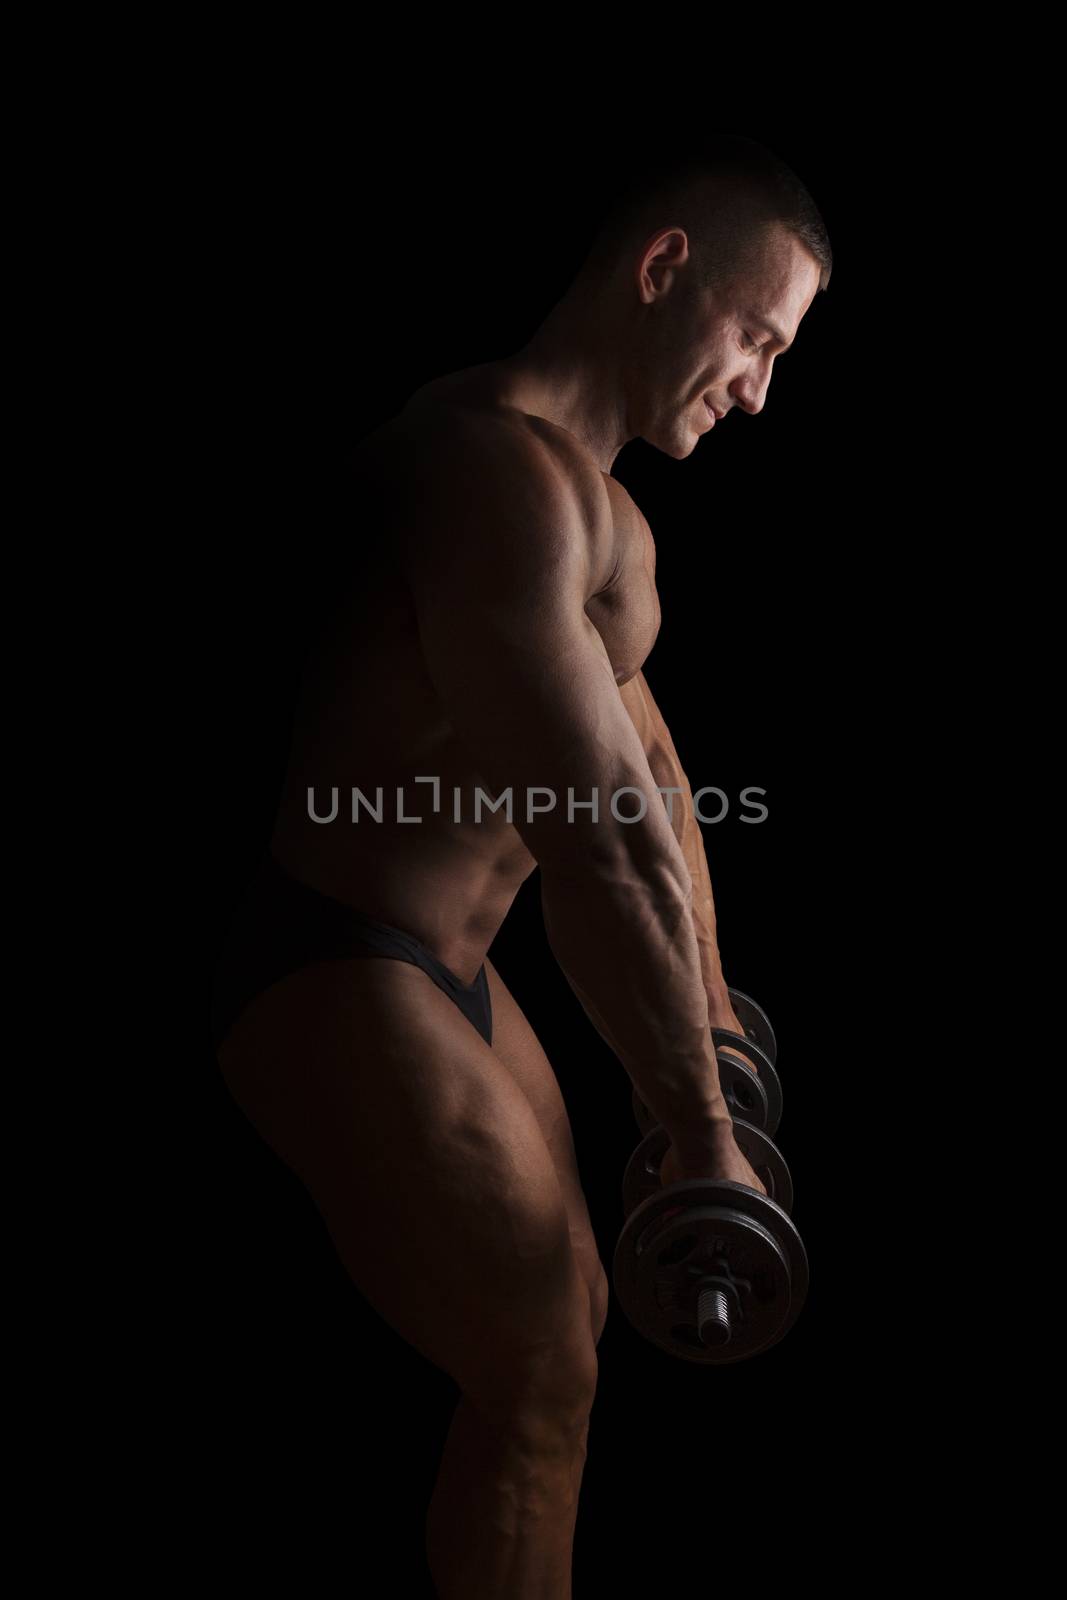 Sexy shirtless bodybuilder lifting weights isolated on black background. Extreme strength, muscles and fitness.